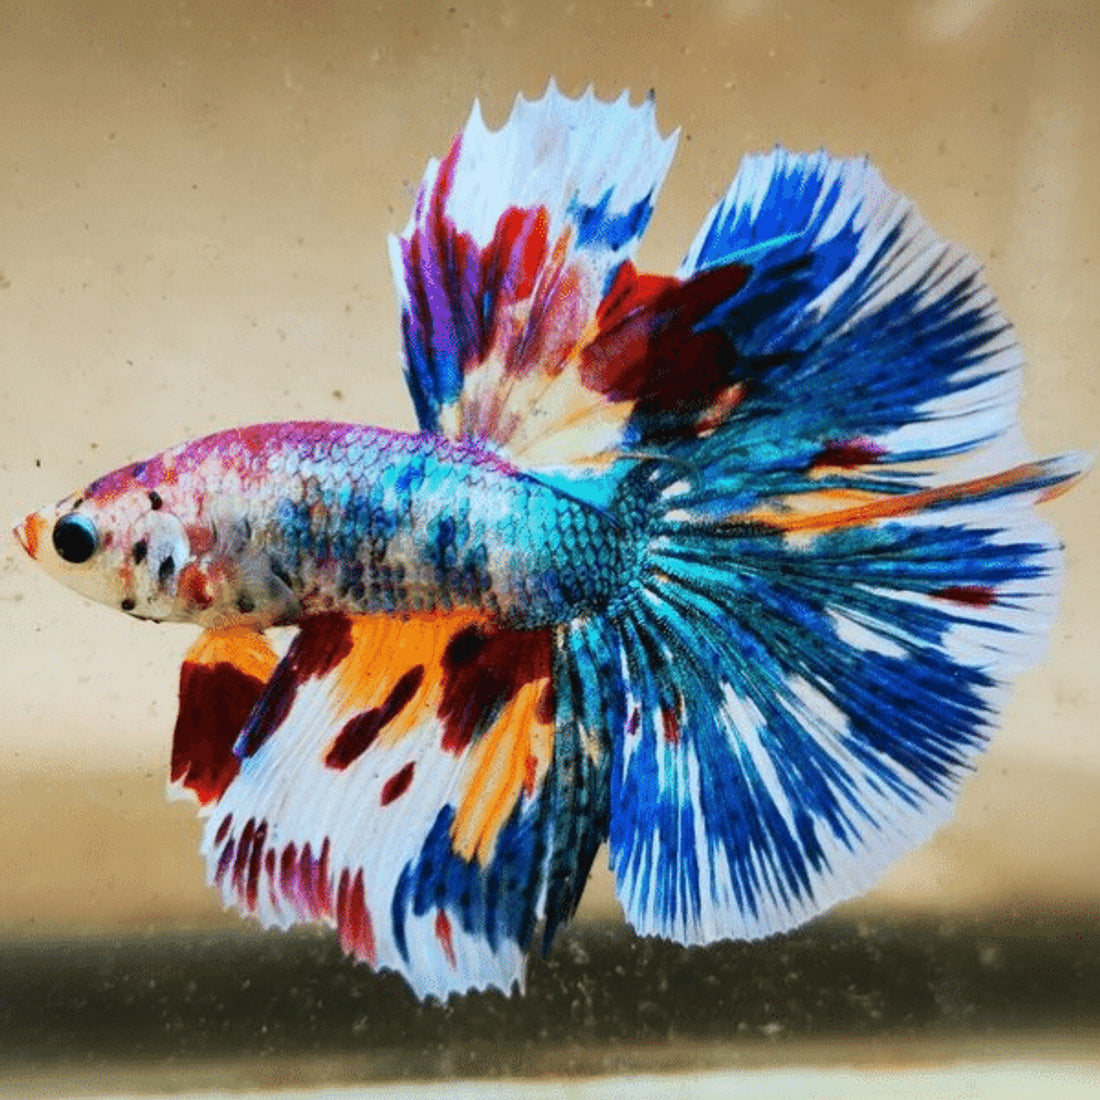 How To Set Up A Betta Fish Tank: Step-By-Step Guide